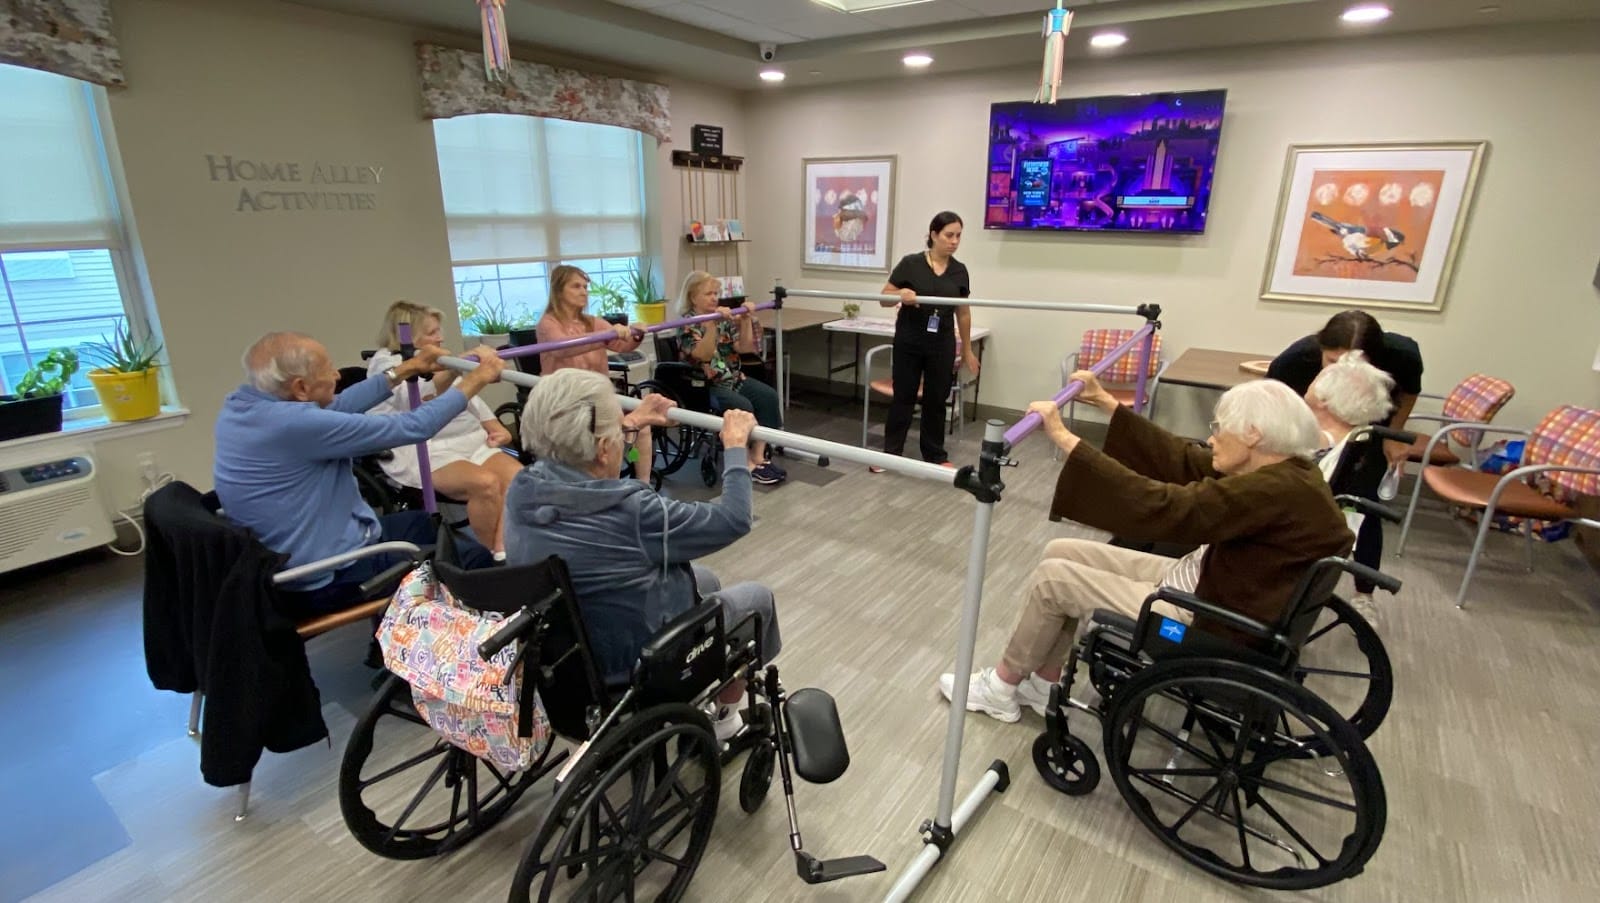 Seniors in an assisted living facility receiving therapy and/or doing exercises